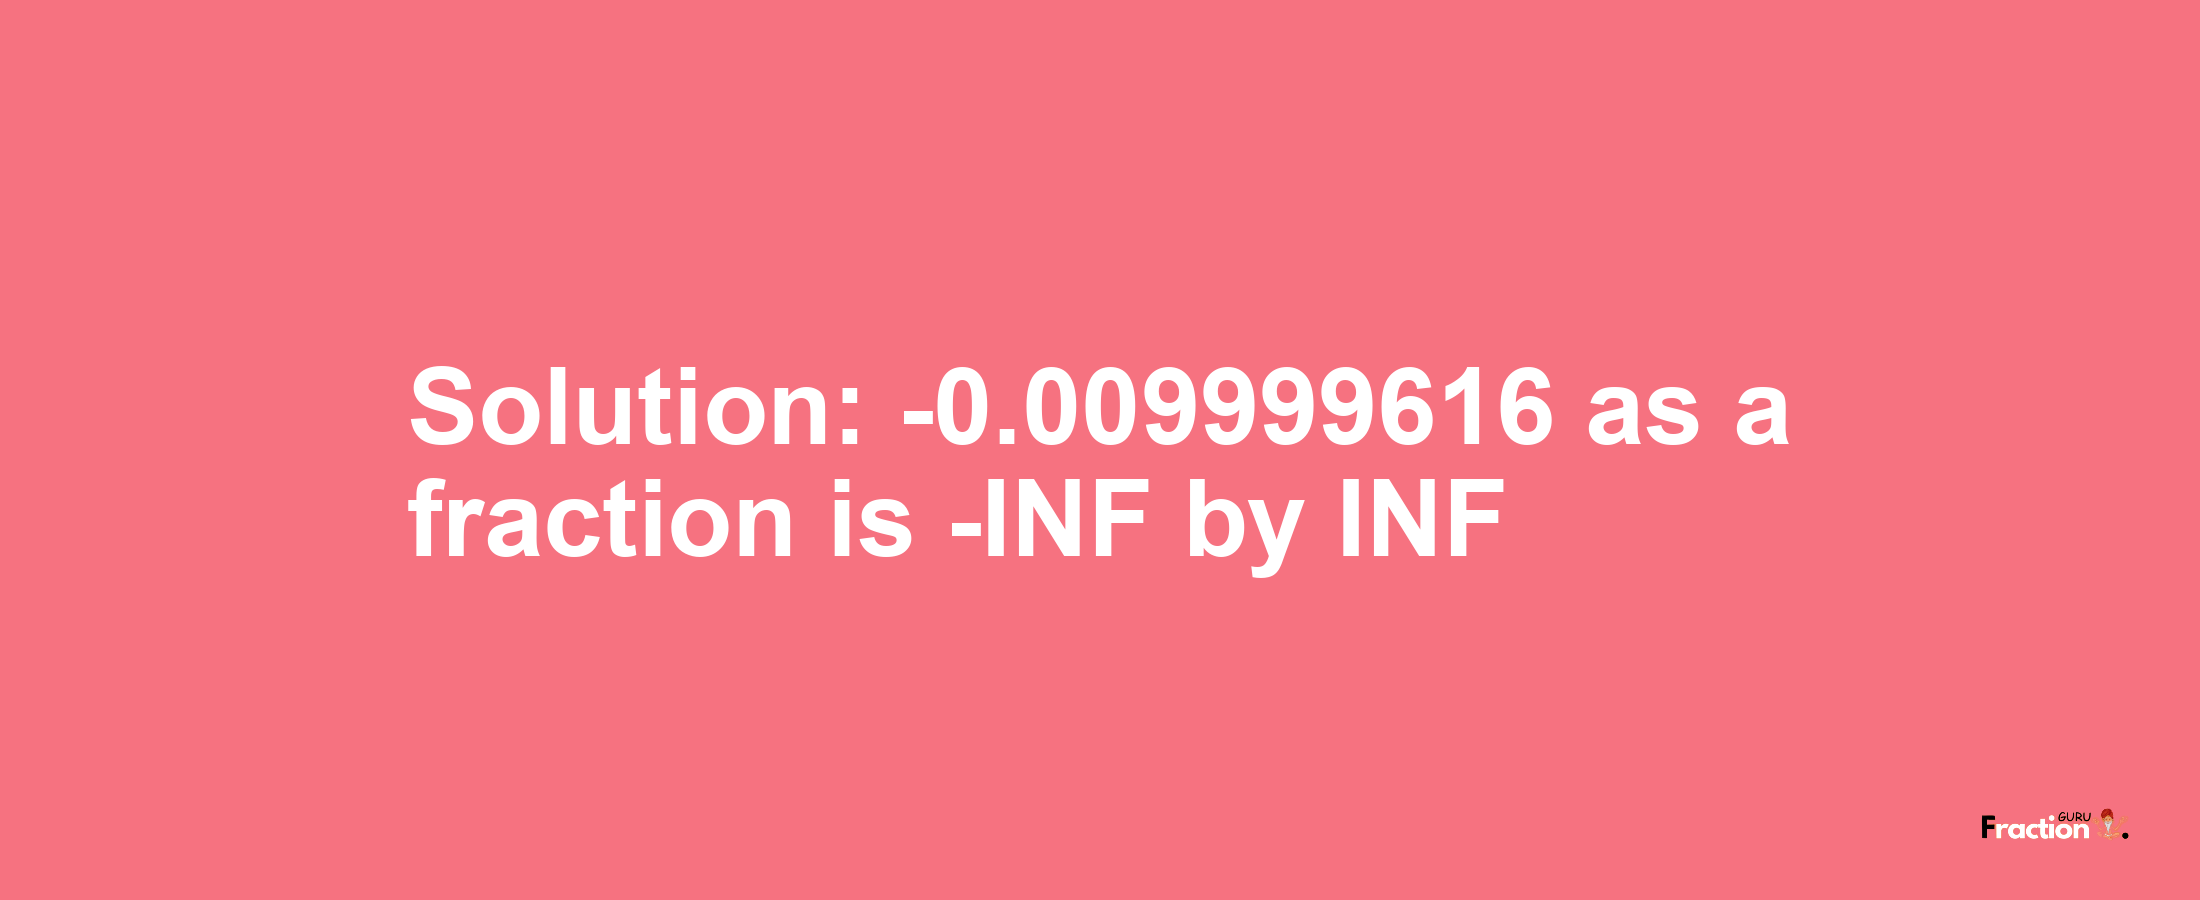 Solution:-0.009999616 as a fraction is -INF/INF